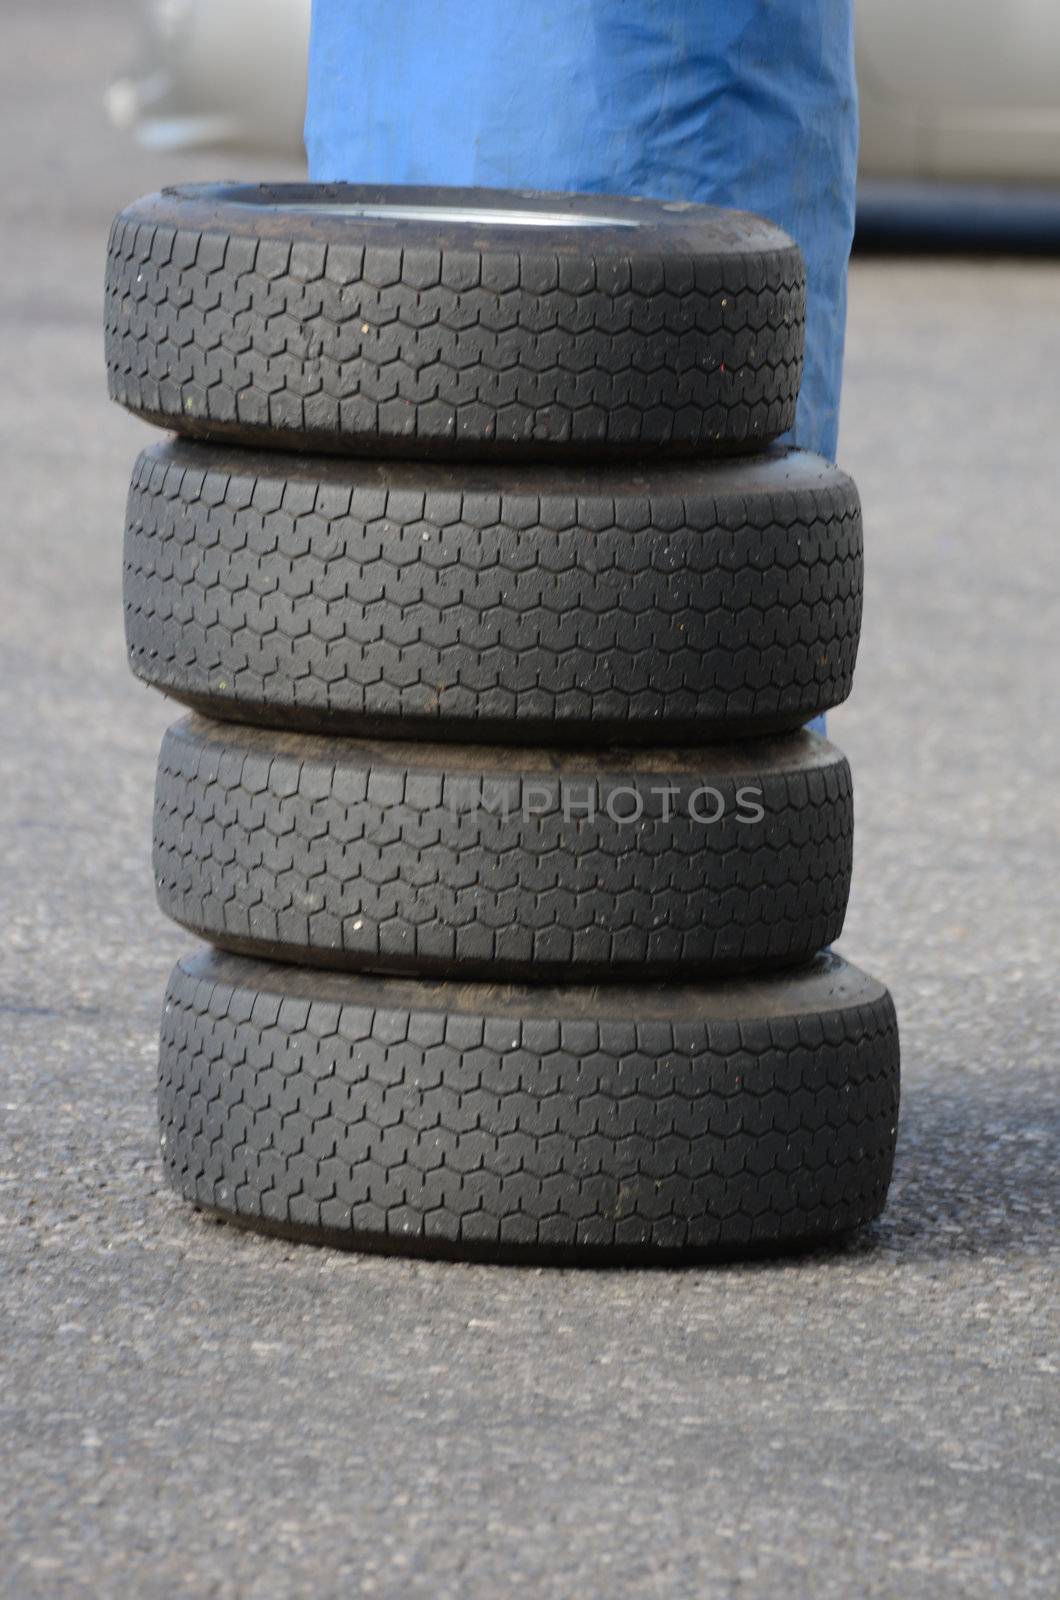 Race Tires by pauws99